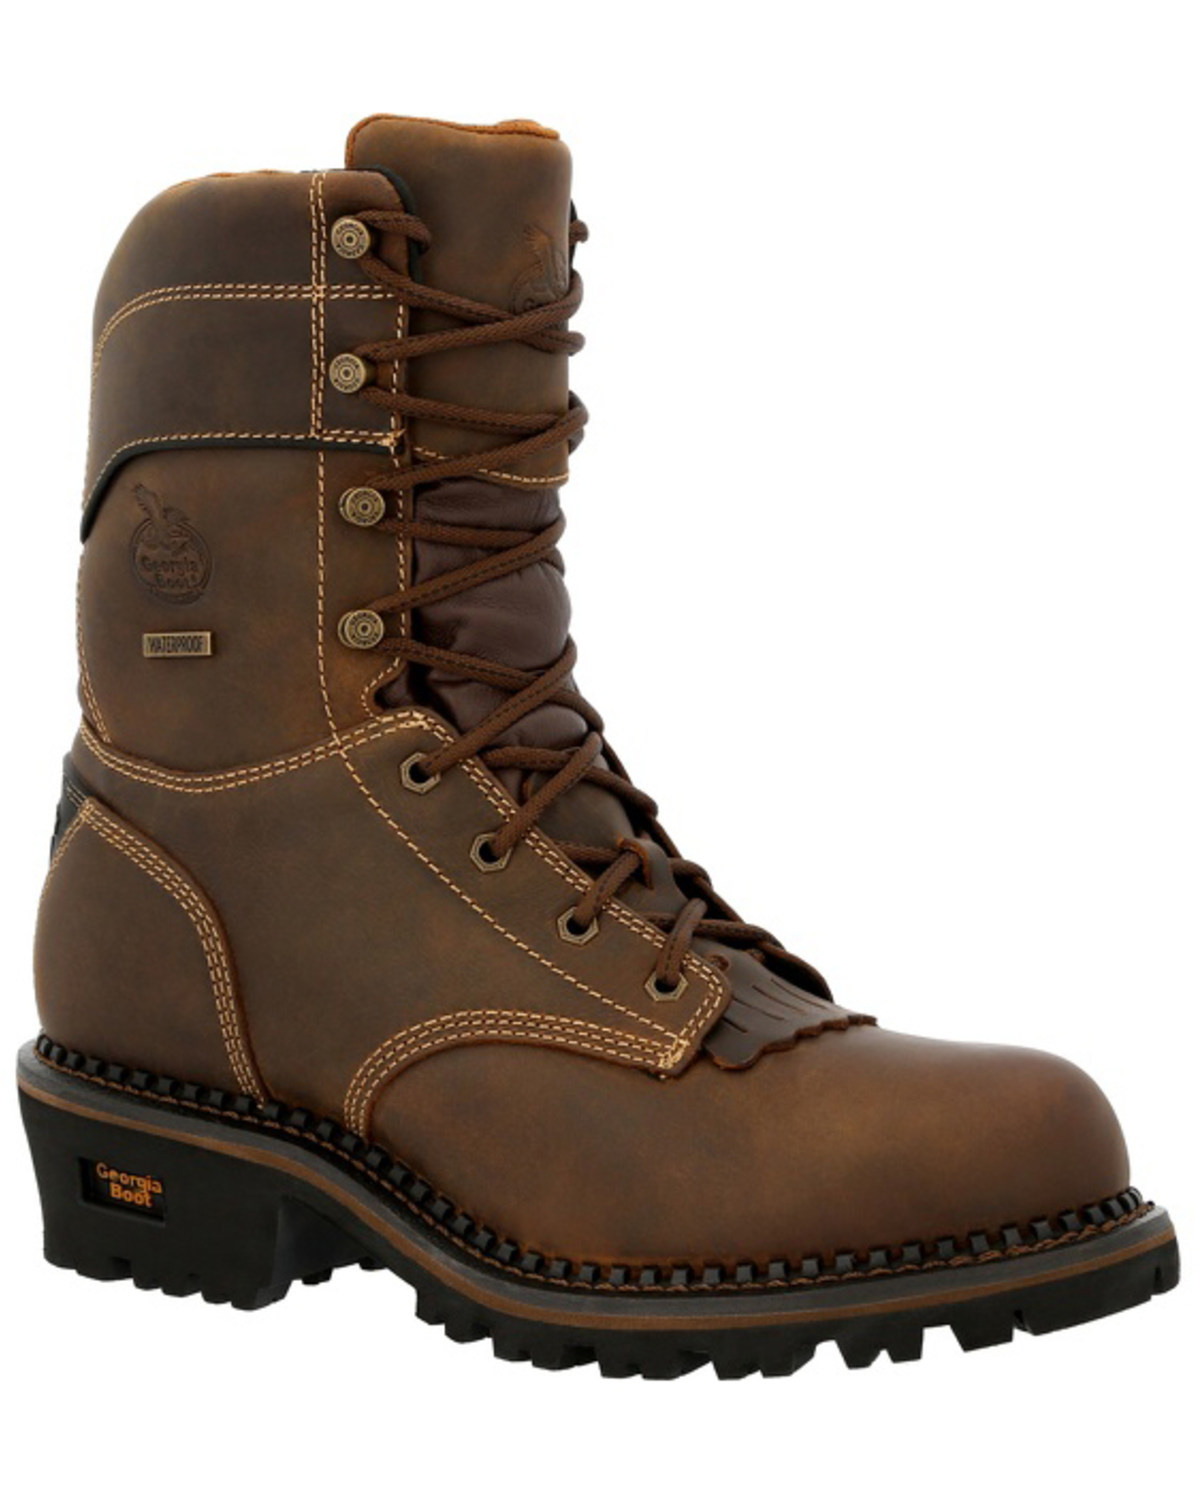 Georgia Boot Men's 9" AMP LT Logger Insulated Waterproof Work Boots - Composite Toe